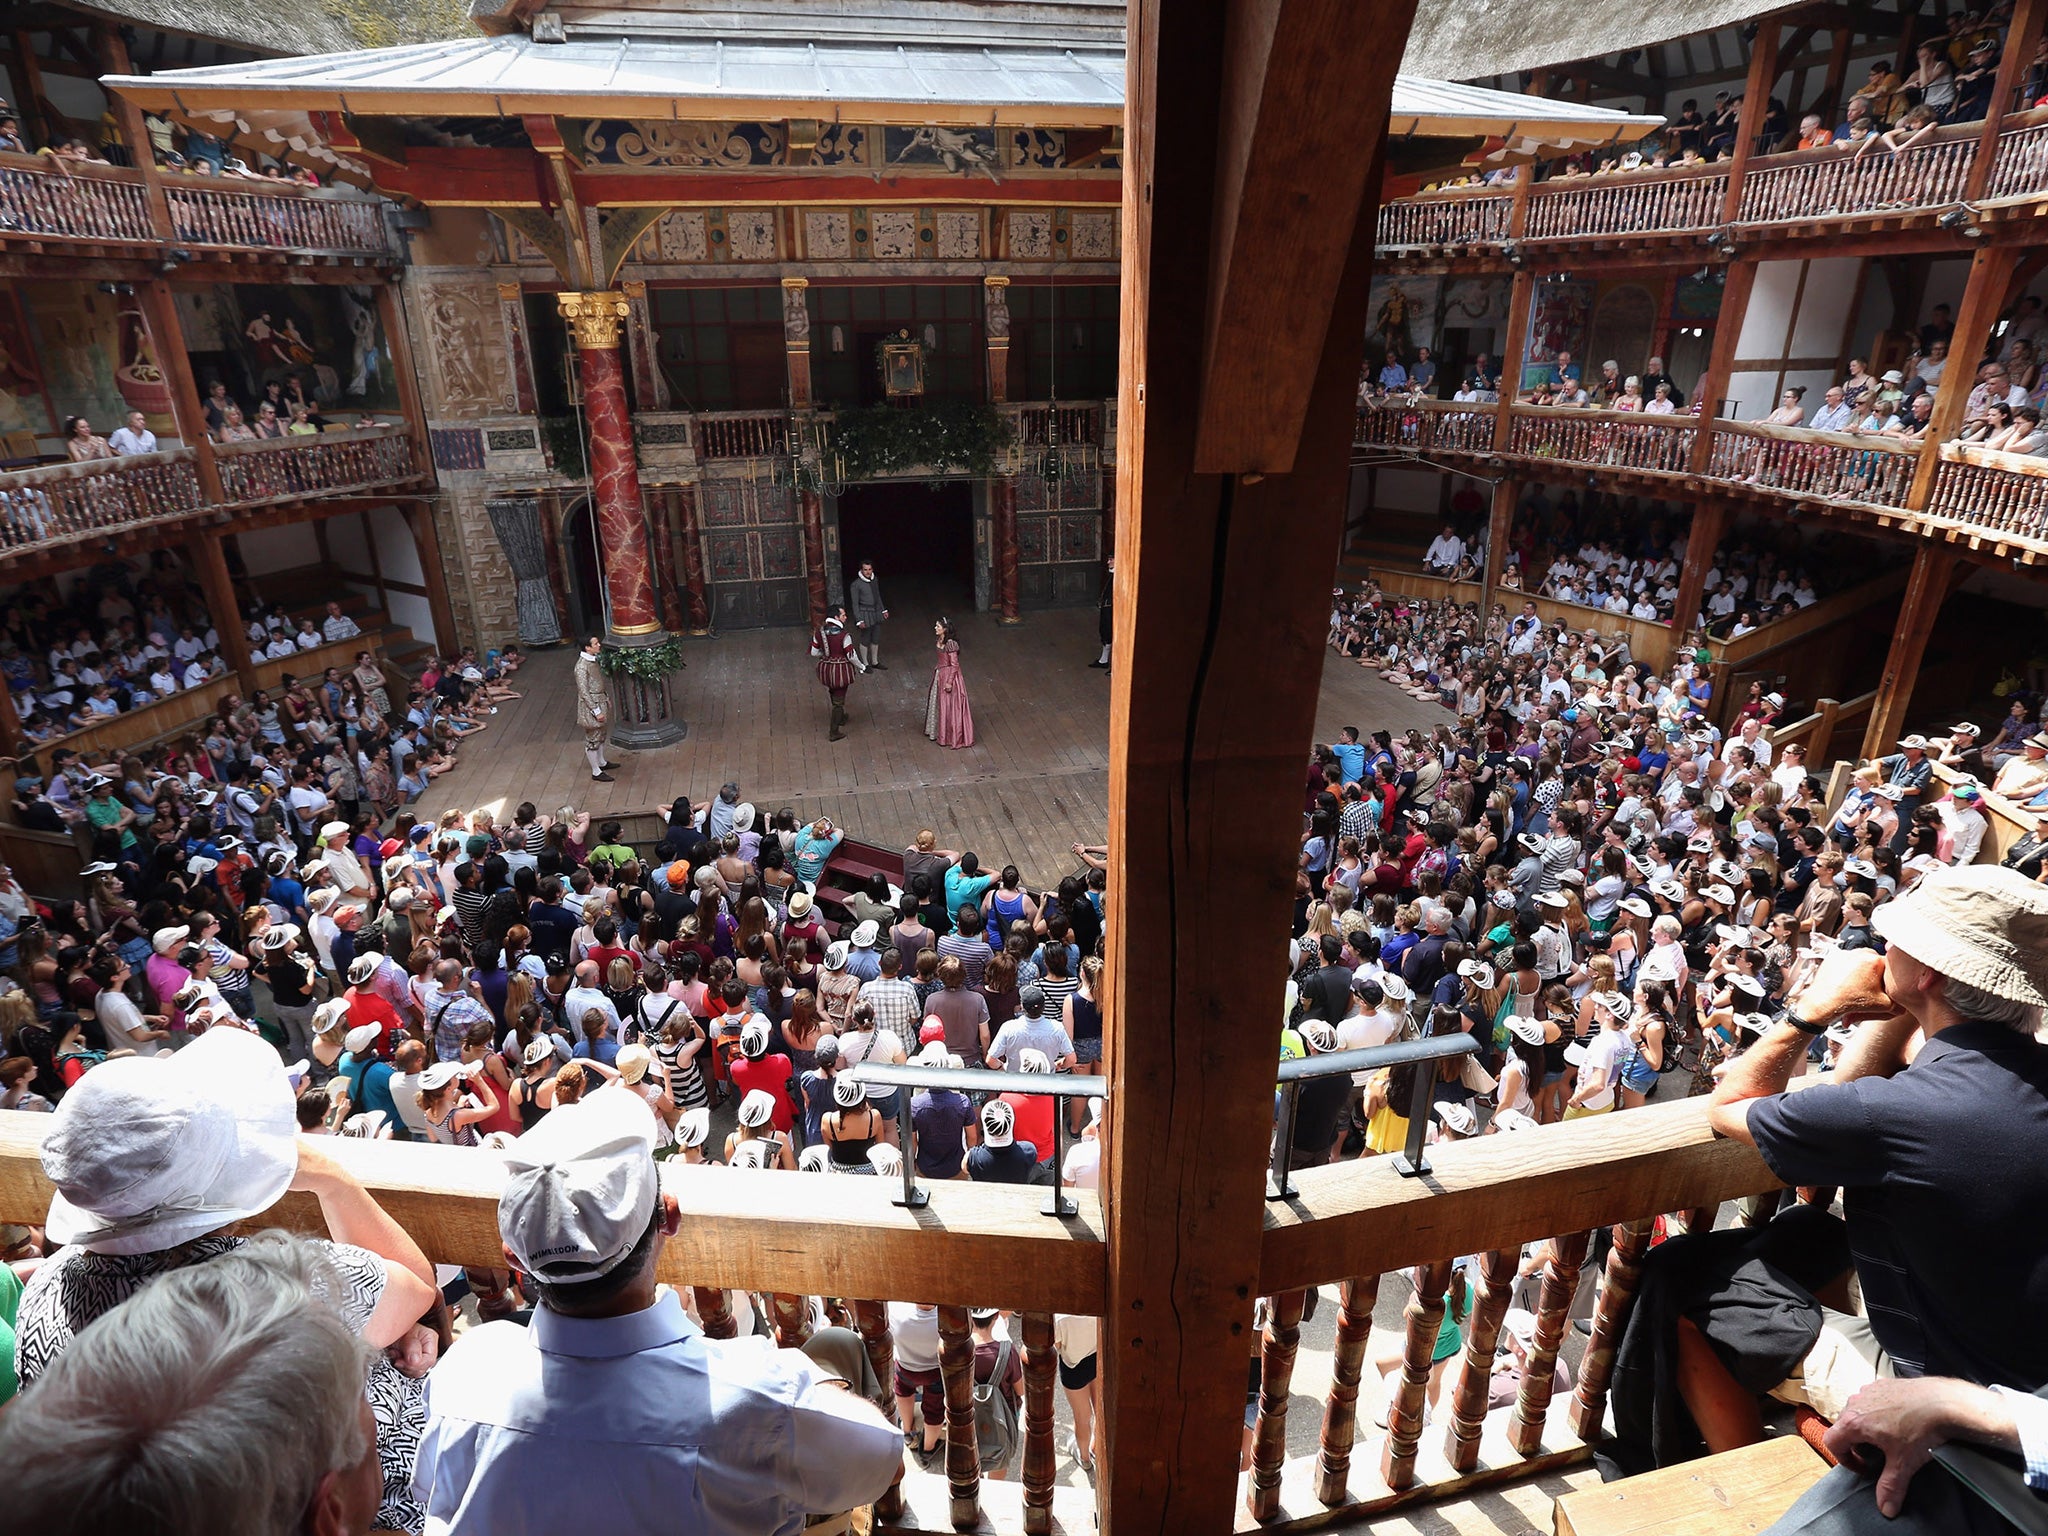 A Midsummer Night's Dream performed at the Globe Theatre in 2013